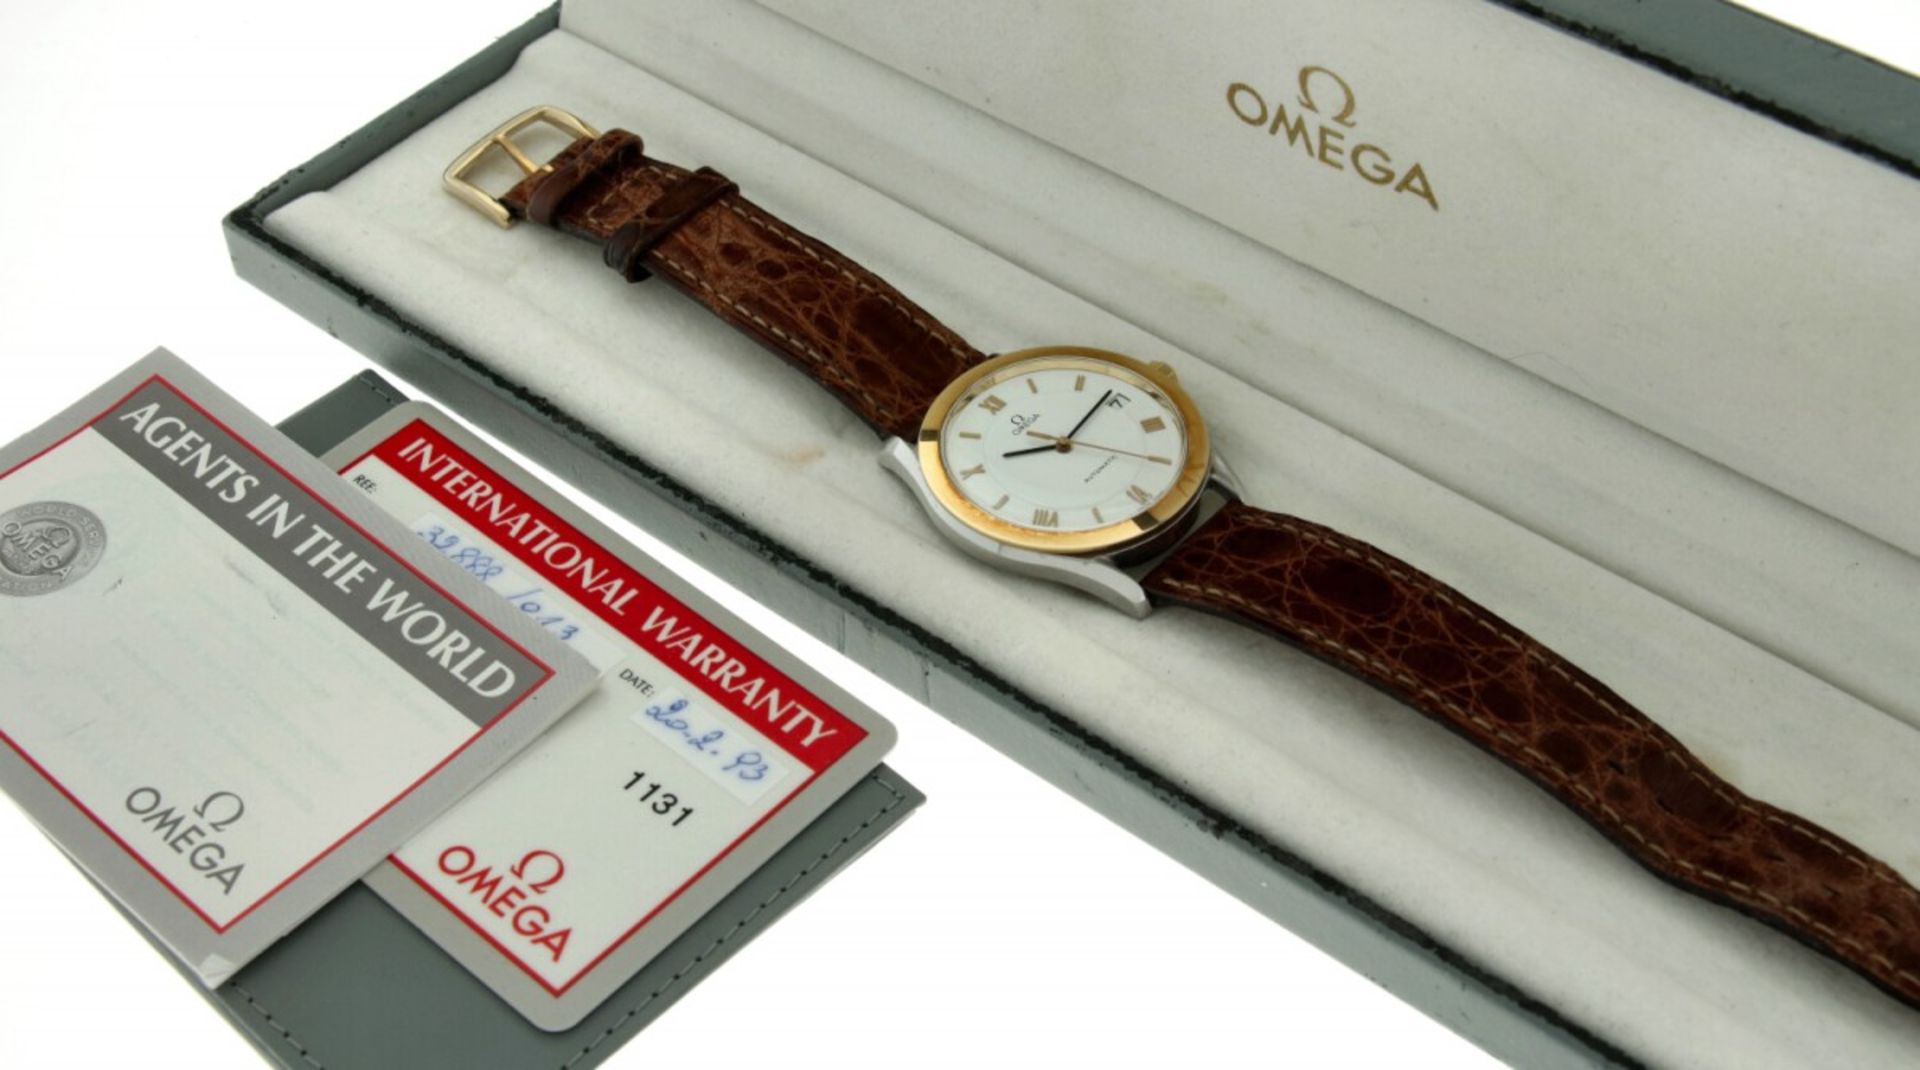 Omega Seamaster Classic 1660285 - Men's Watch appr. 1993. - Image 7 of 7